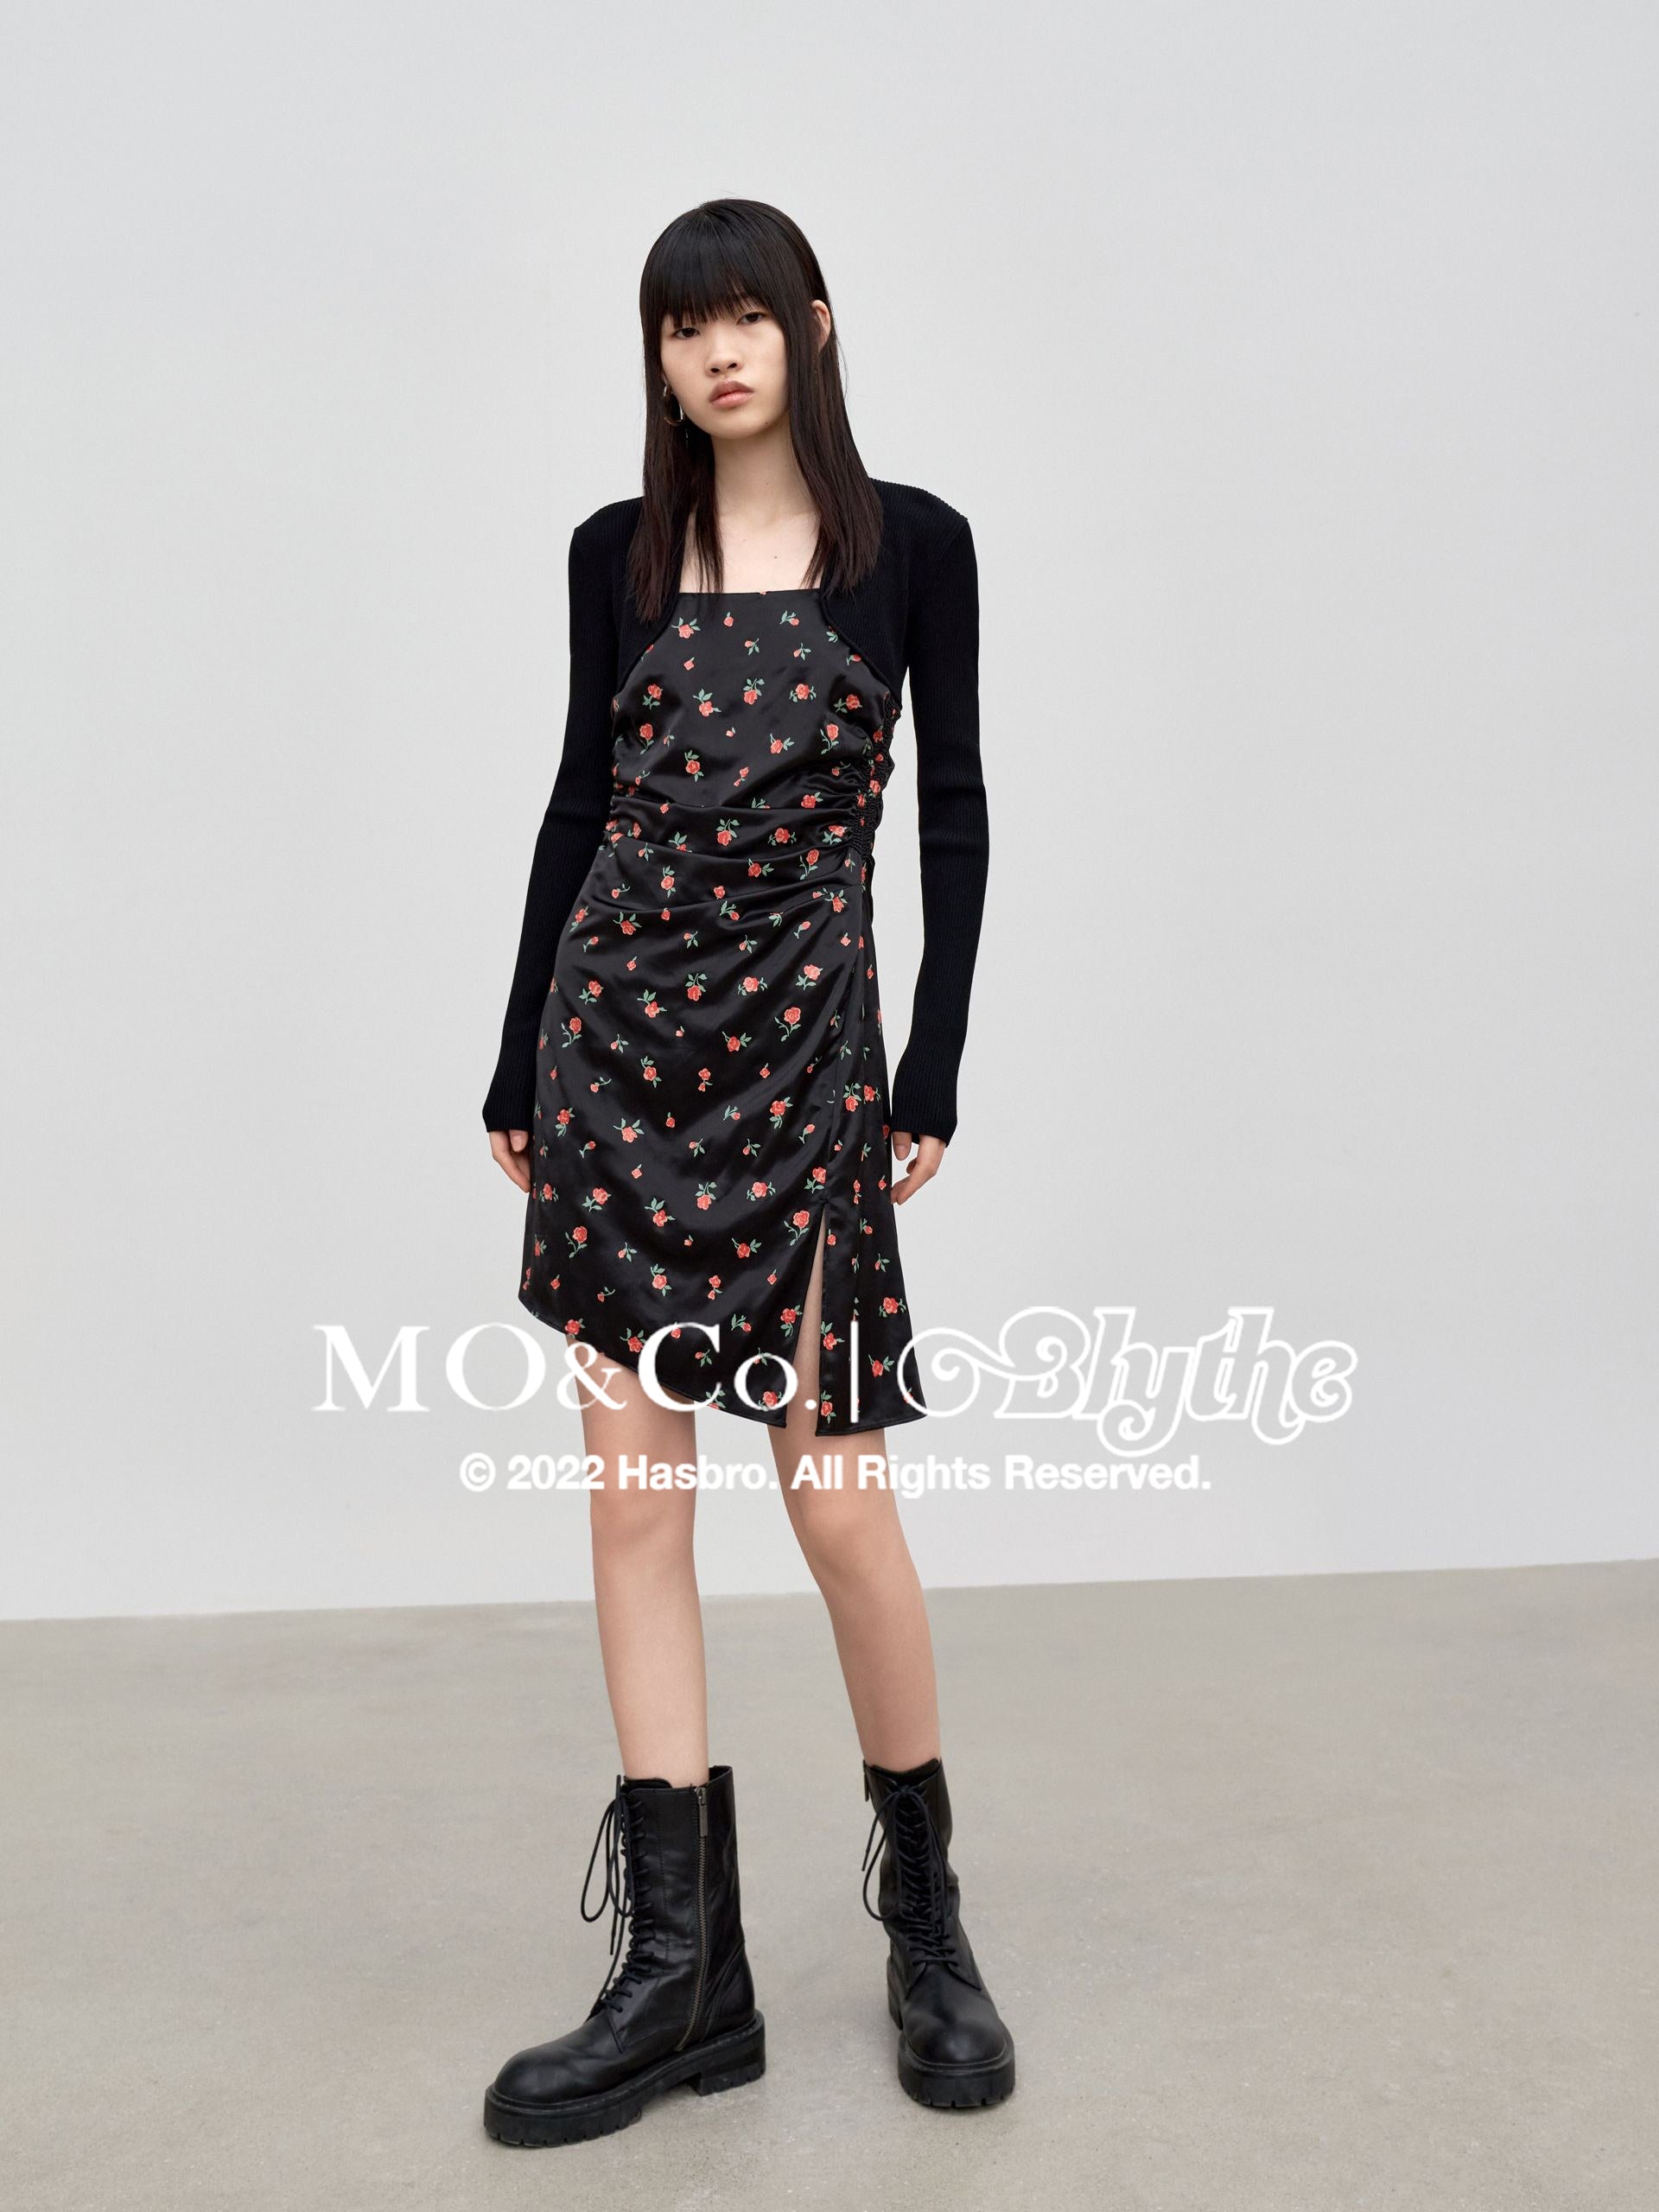 MO&Co.｜Blythe Collaboration Irregular Panel Dress Fitted Casual Square Neck  Black Dress